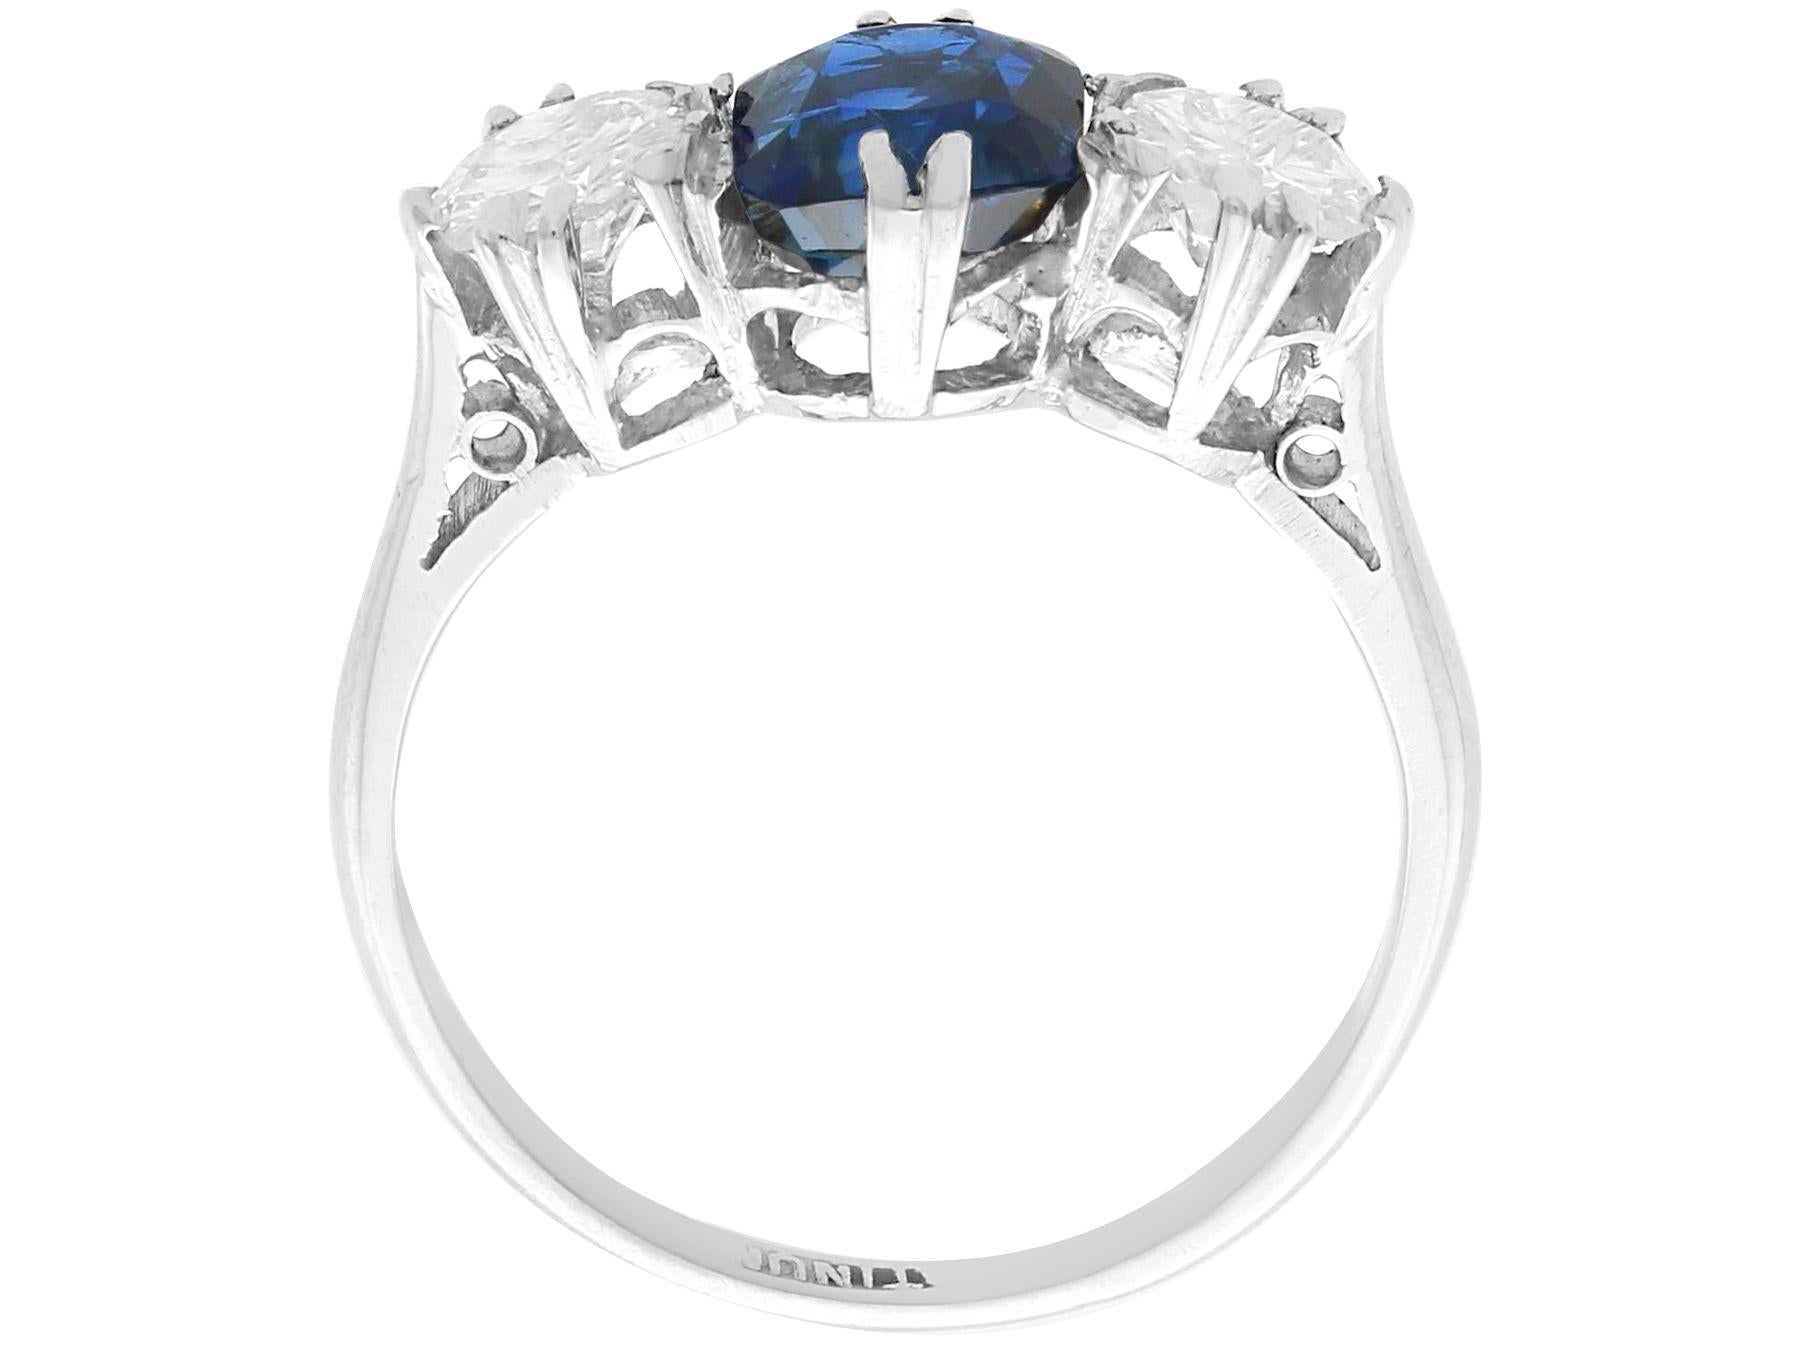 Women's or Men's Antique 1.33 Ct Basaltic Sapphire and 0.88 Ct Diamond Platinum Trilogy Ring For Sale